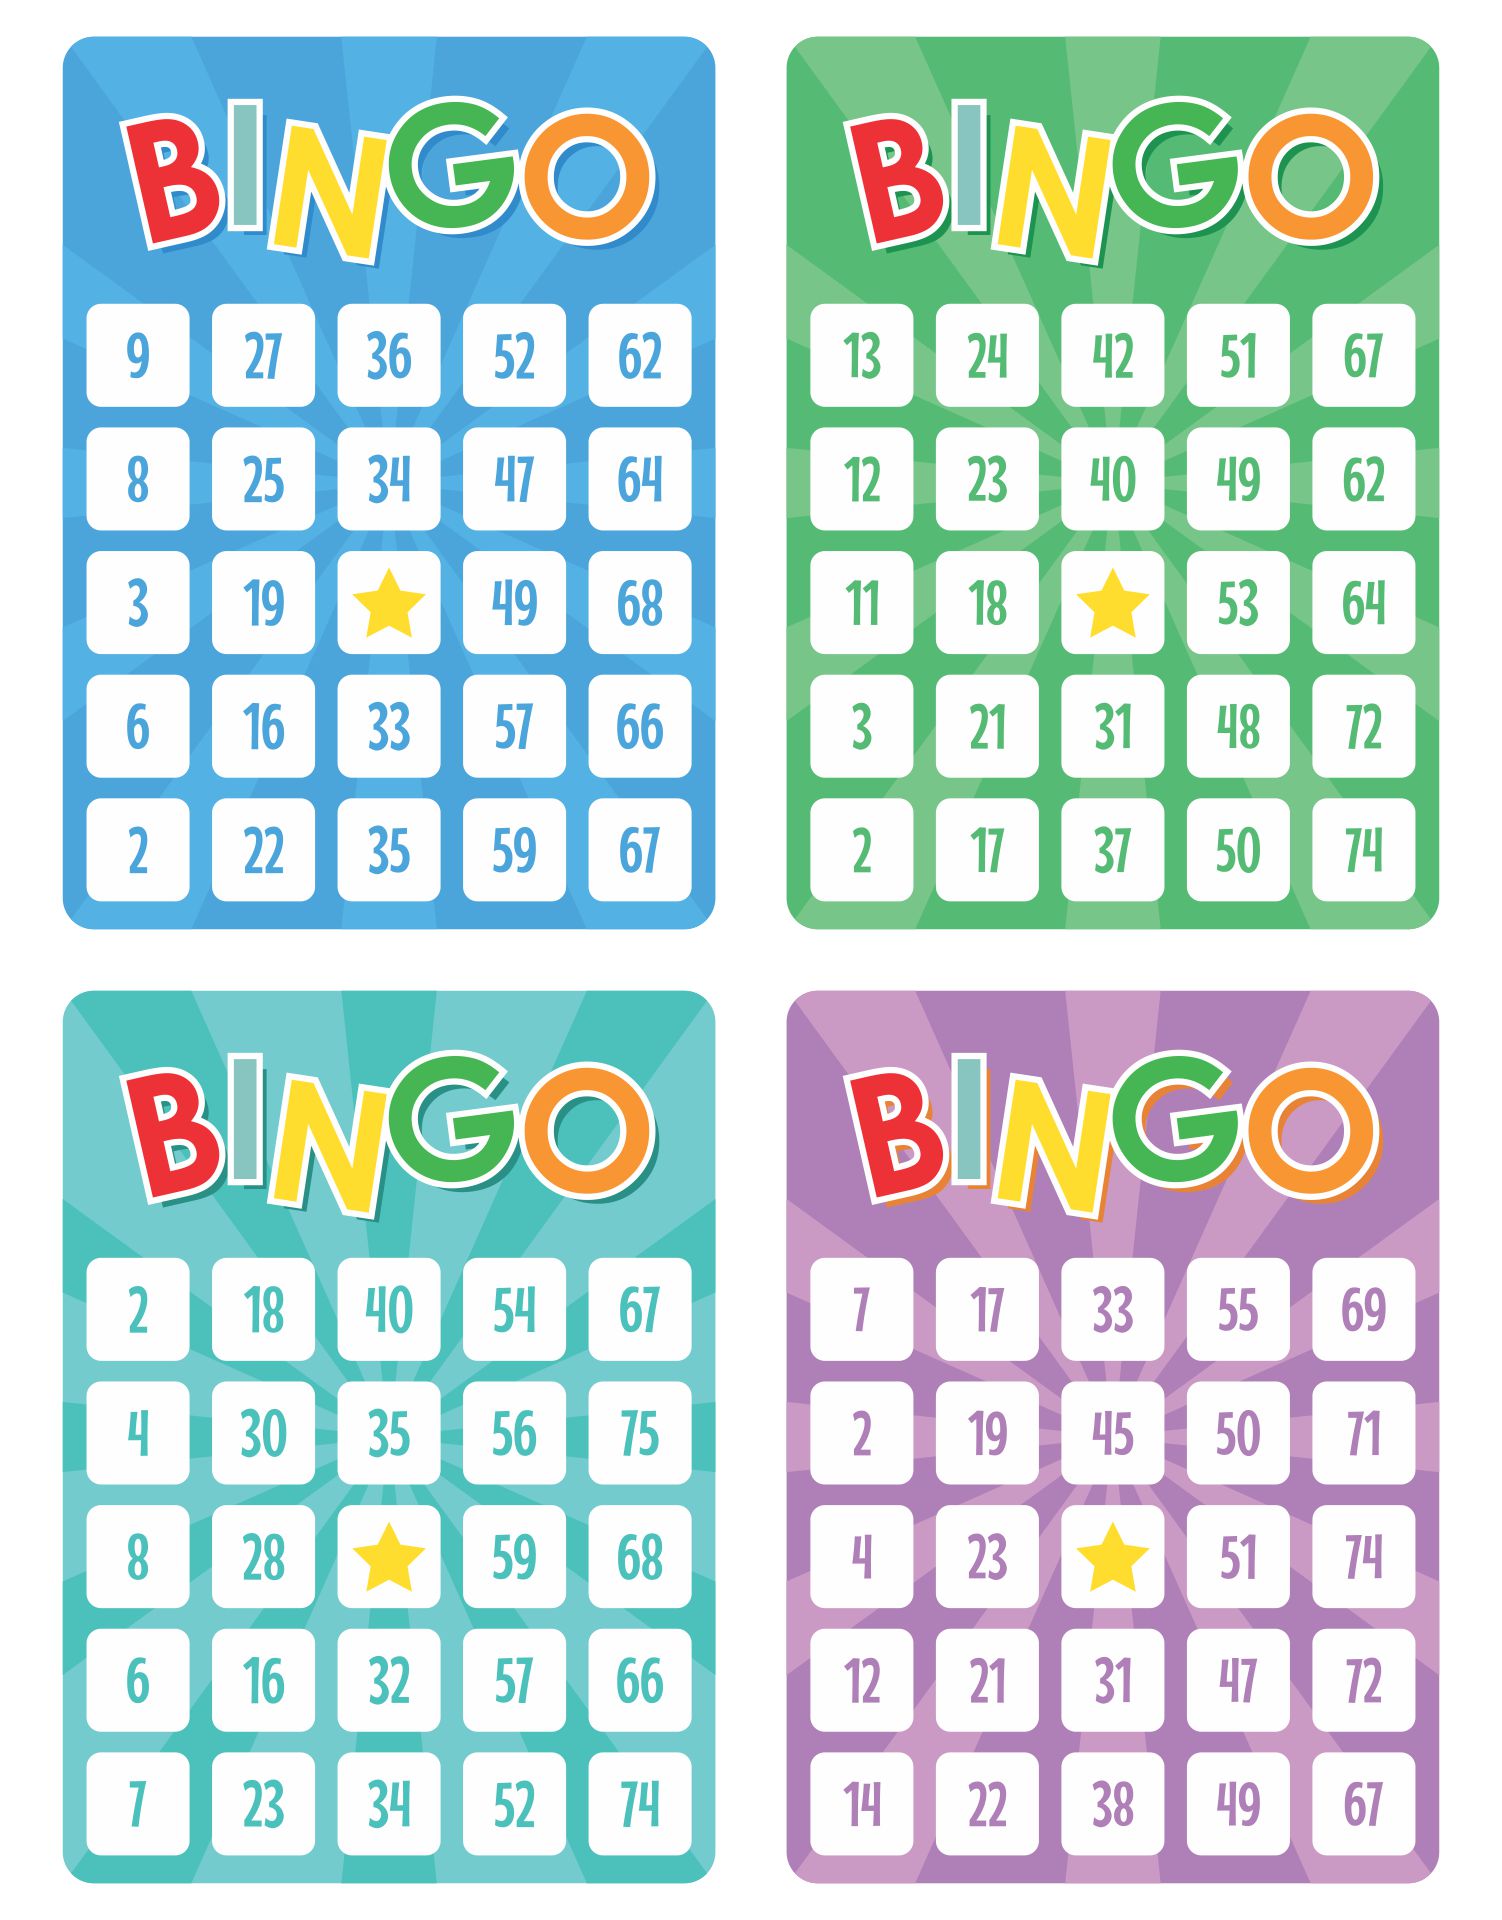 bingo-cards-1000-cards-4-per-page-large-print-immediate-pdf-download